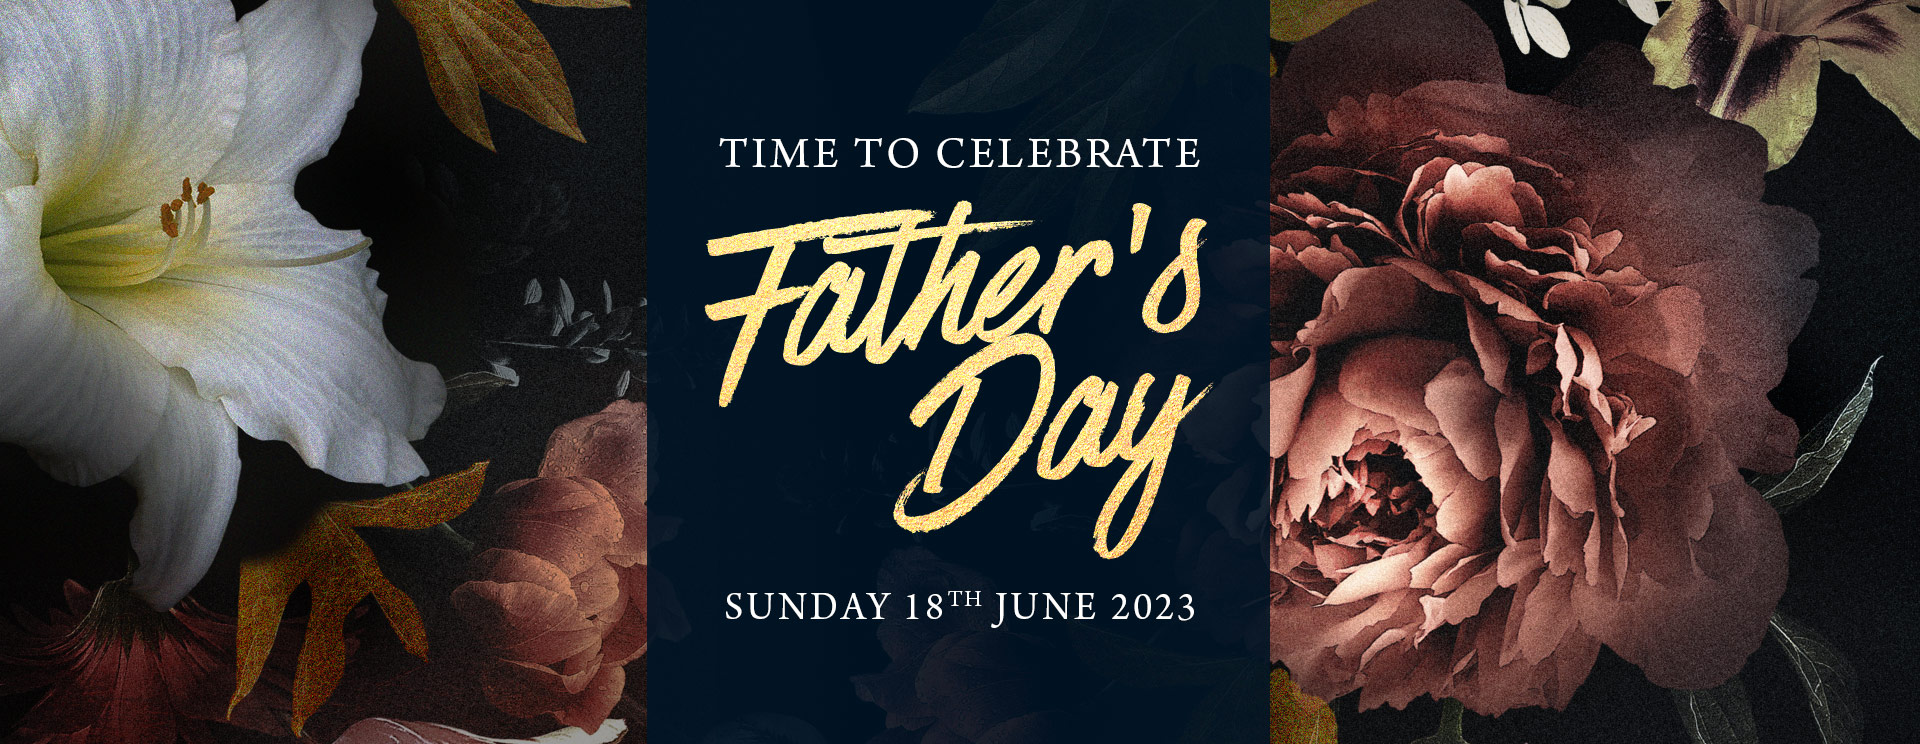 Fathers Day at The Fishery Inn